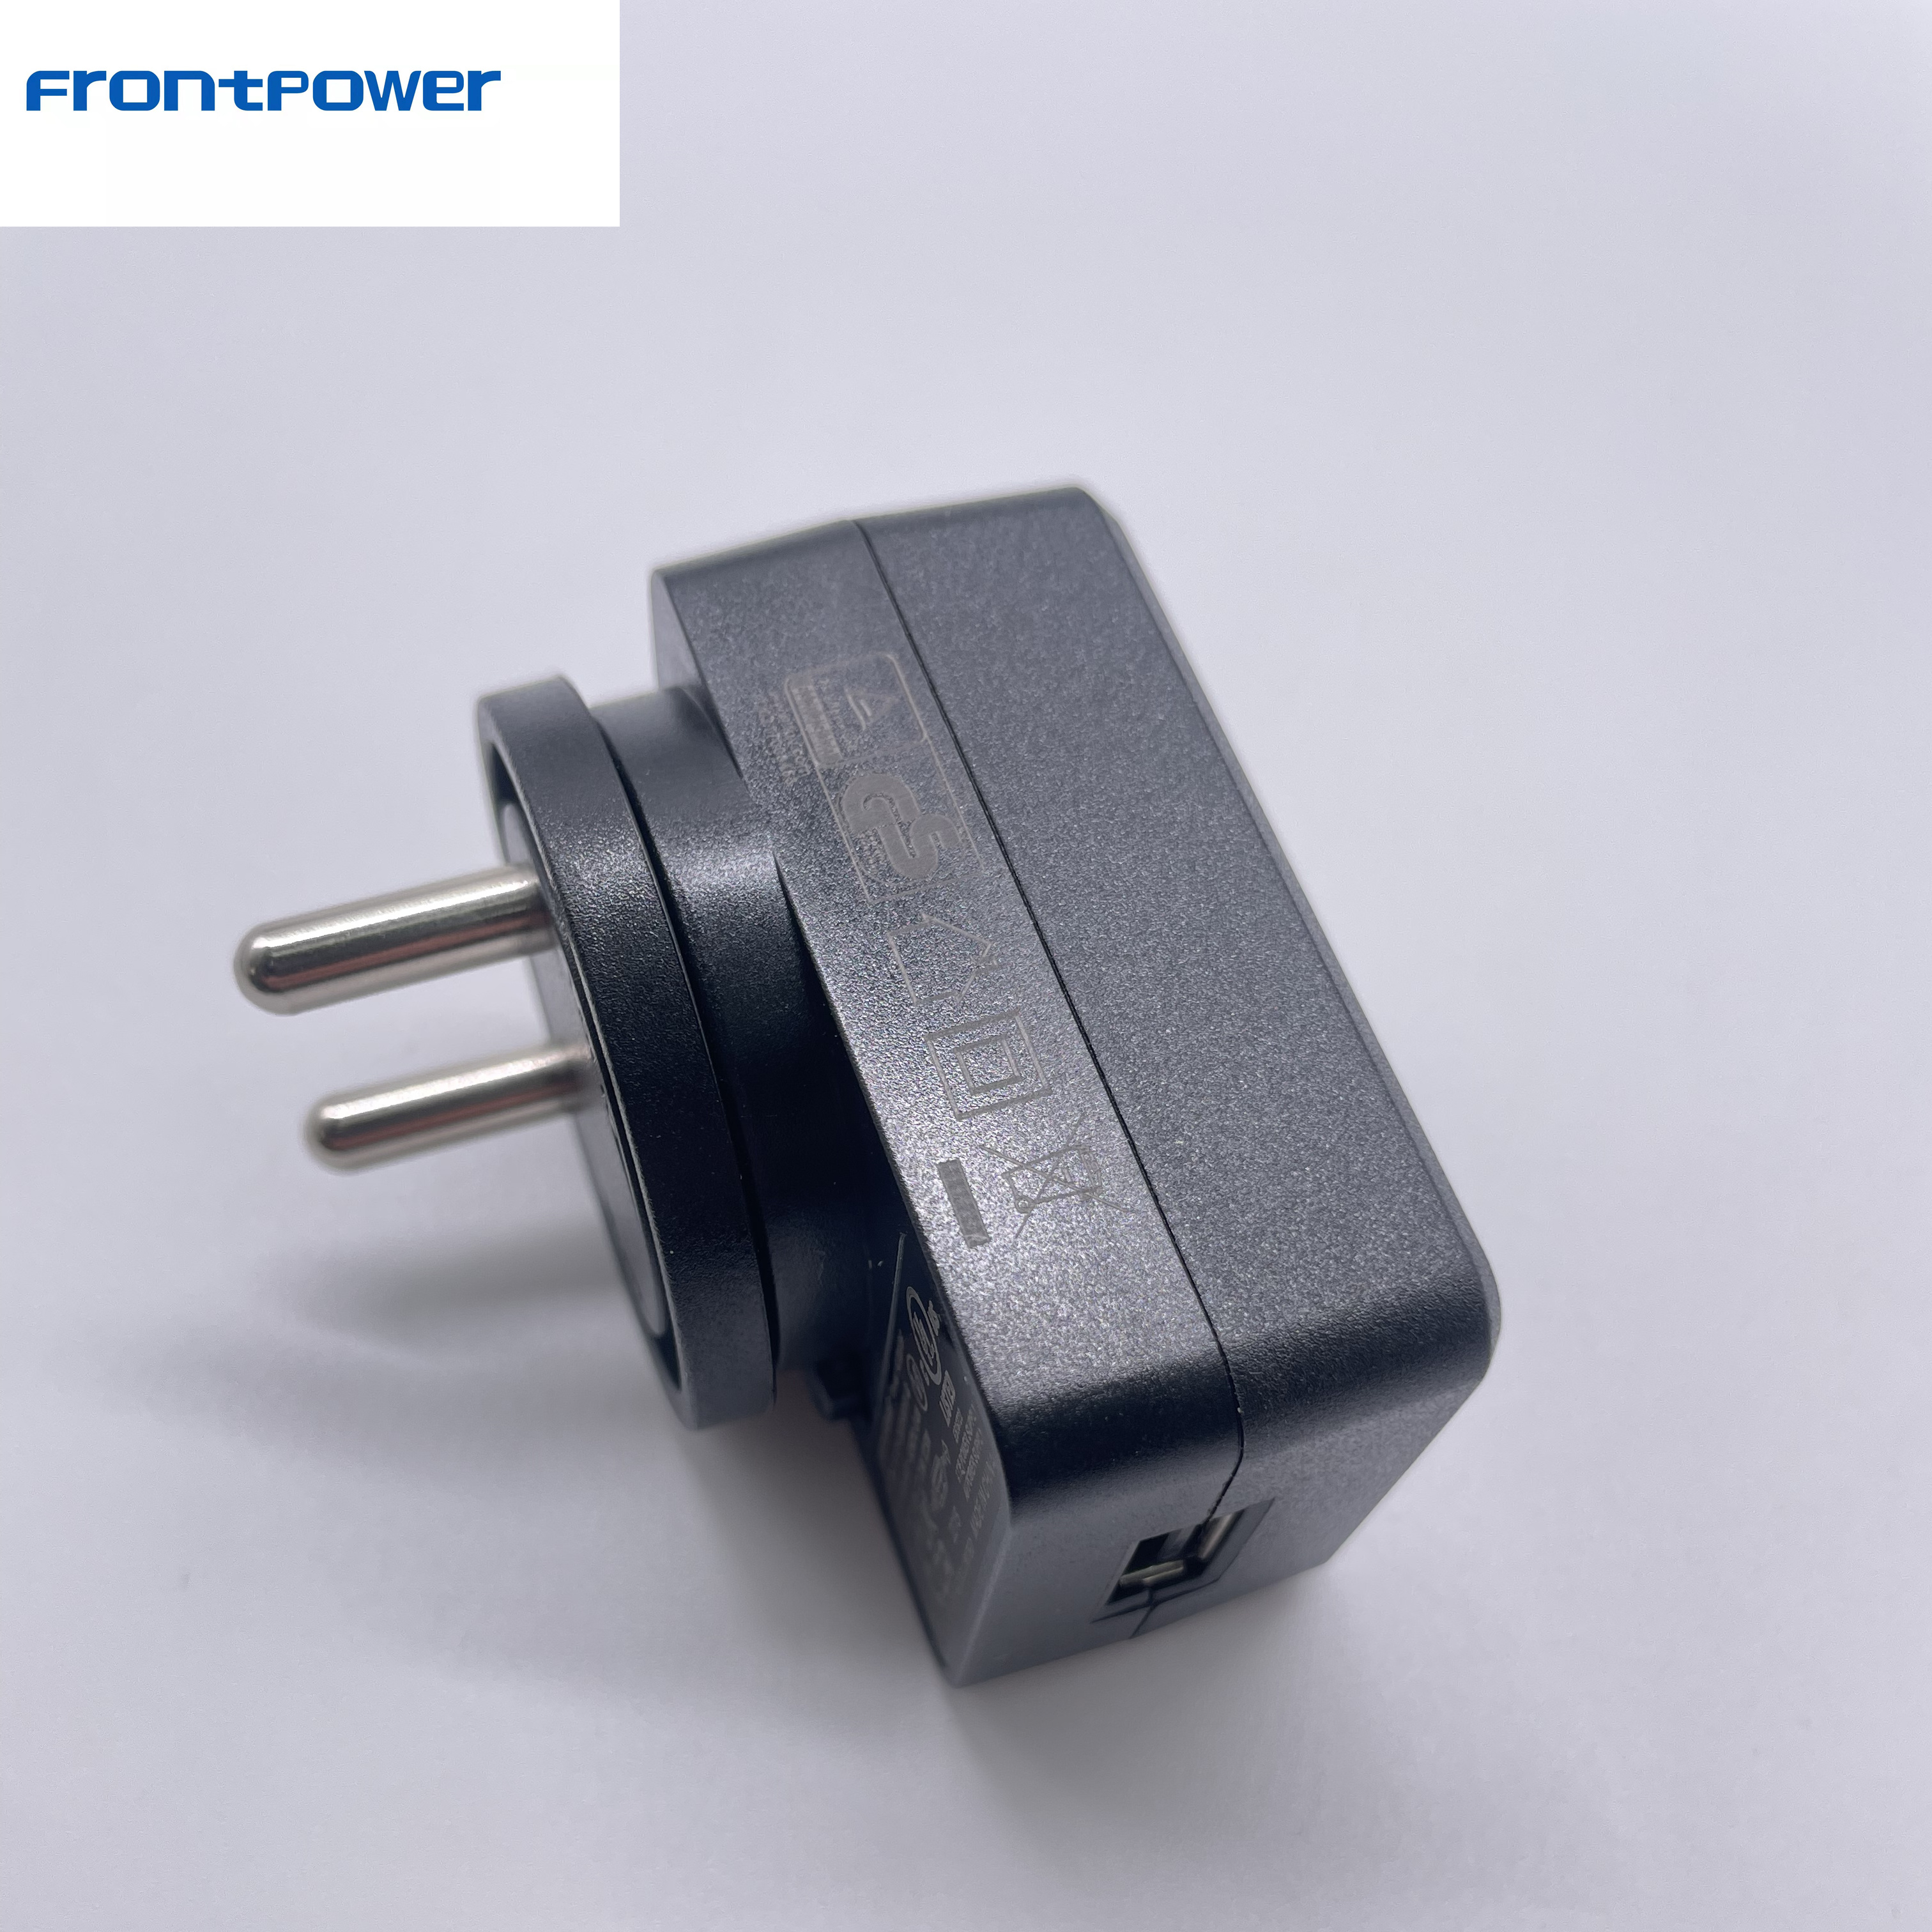 Frontpower charger 5V 2A 2.5A 3A USB interchangeable plug power adapter with BIS UL CE GS FCC UKCA certs